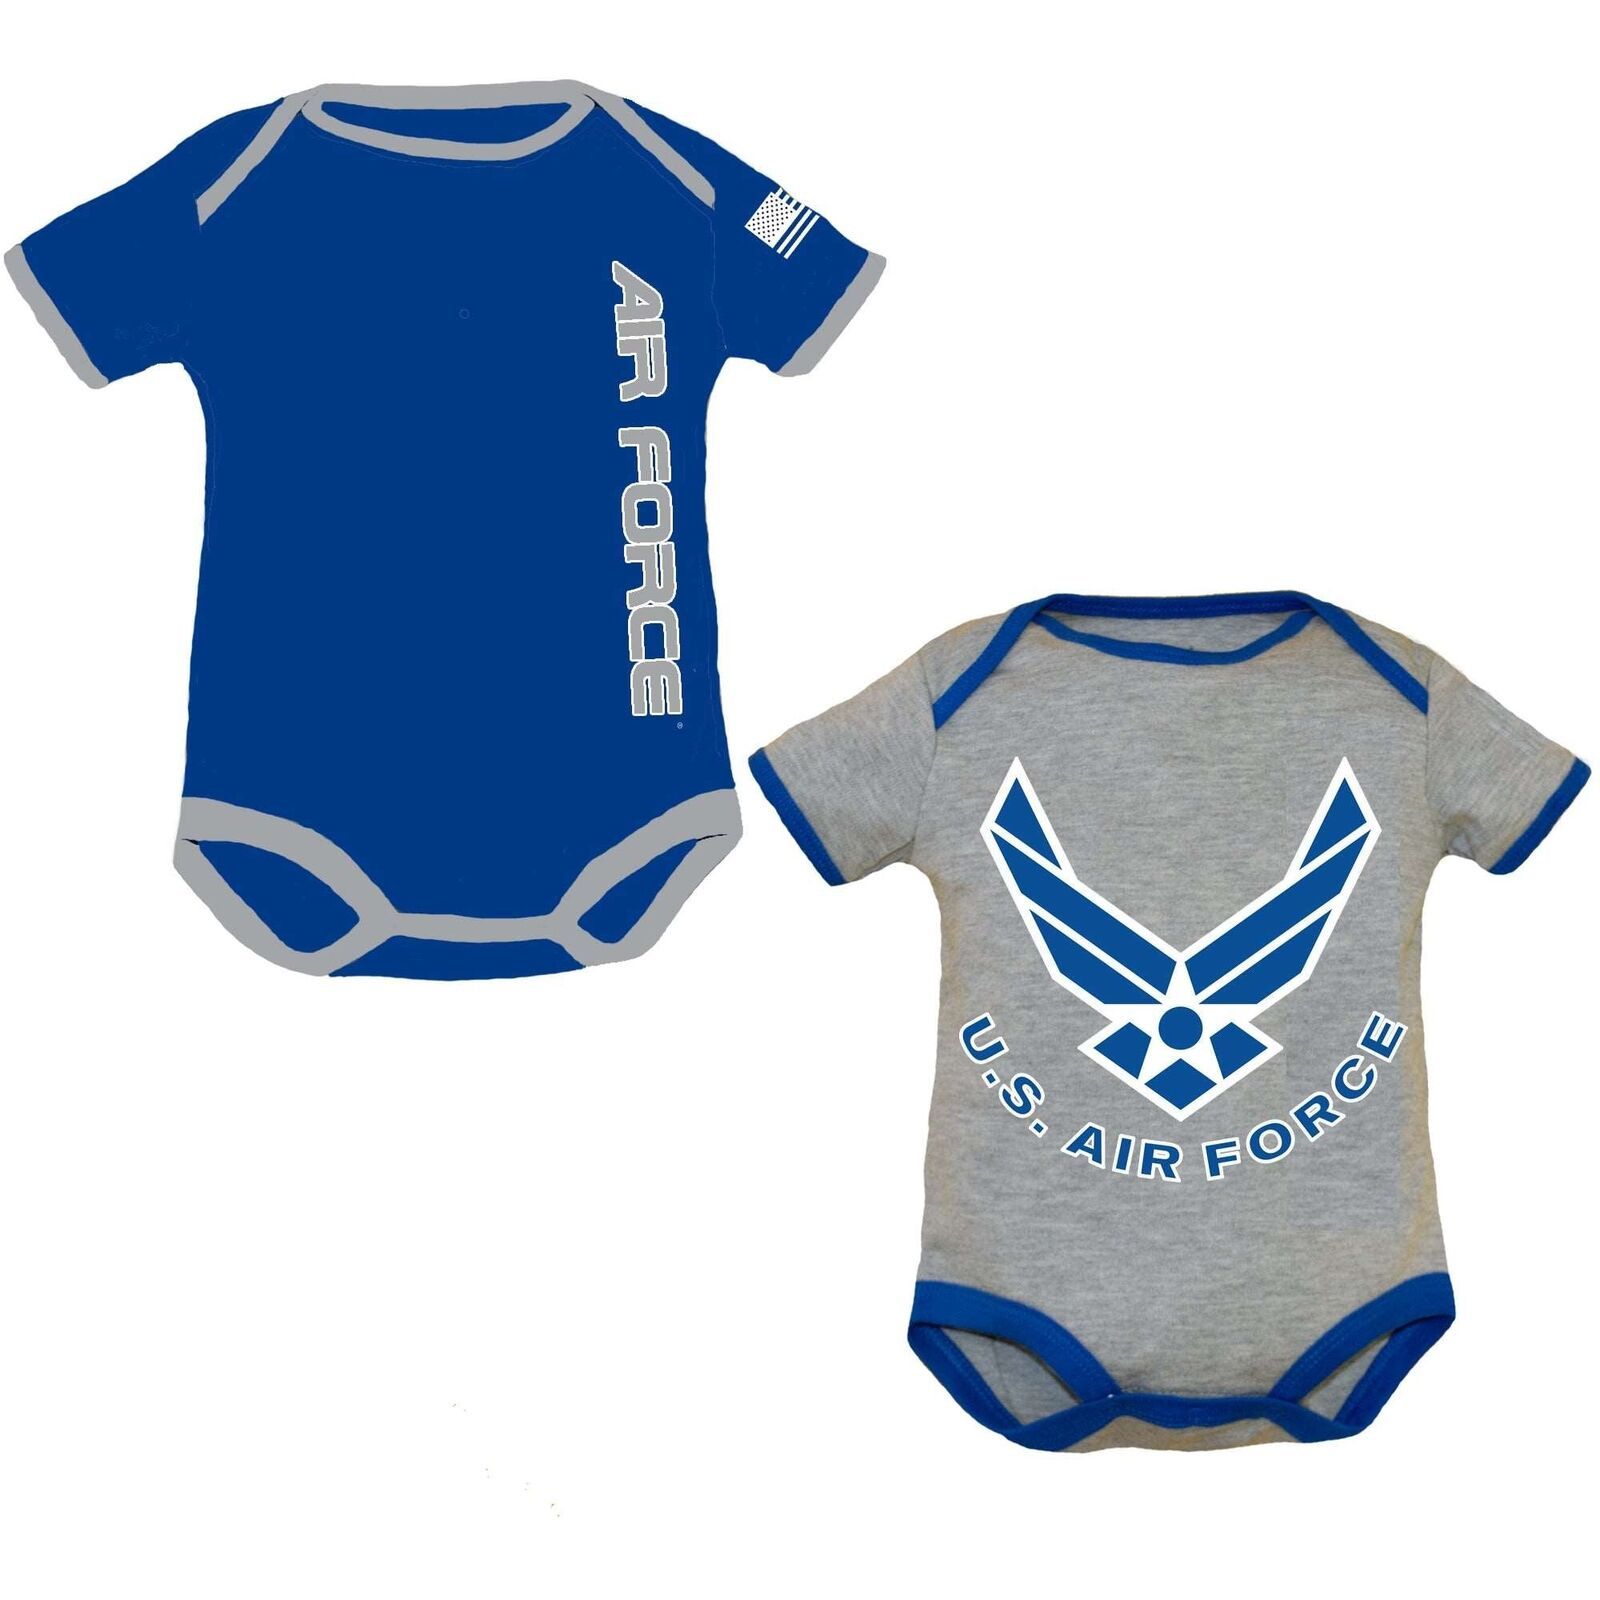 Primary image for Officially Licensed Air Force Baby Bodysuits - 2 Pack Set